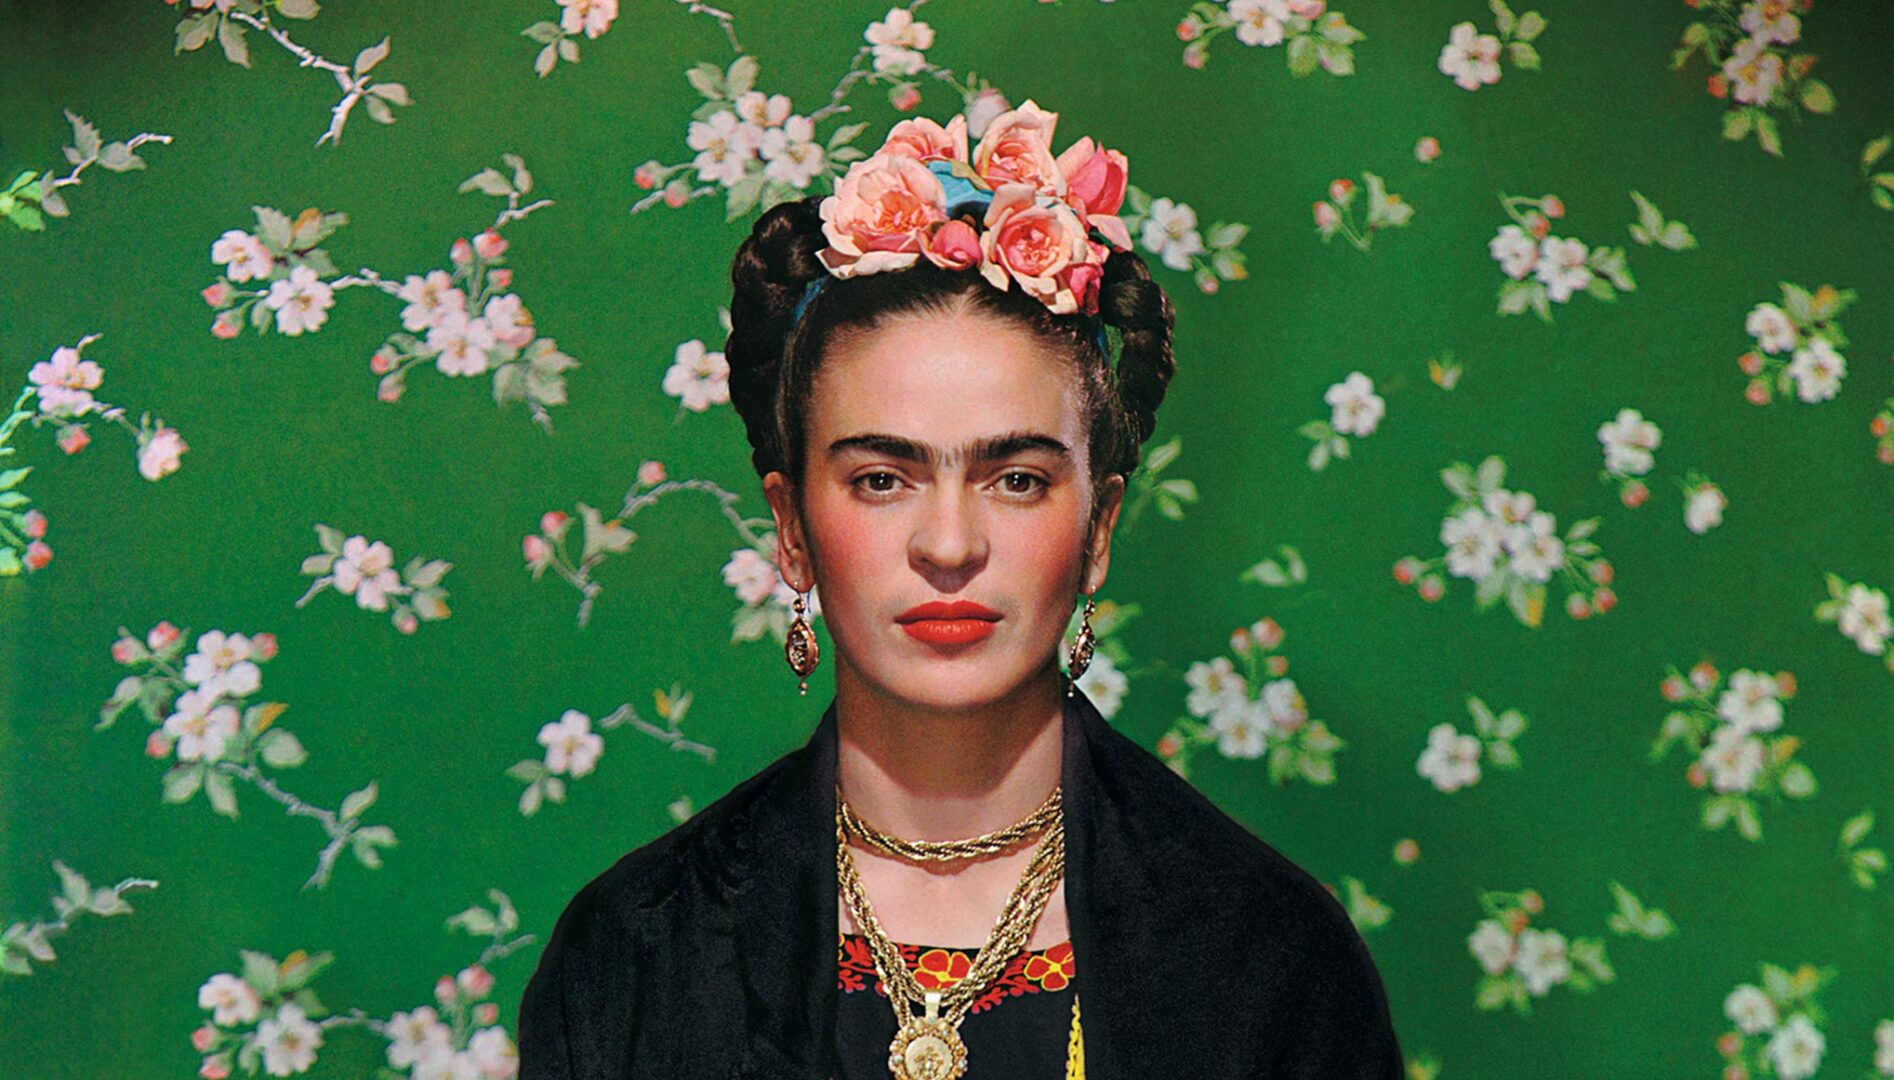 Frida Kahlo with a pink flower crown, heavy gold jewelry, and her hair up in braids, sitting against a bright green wallpaper with pink flowers on it.